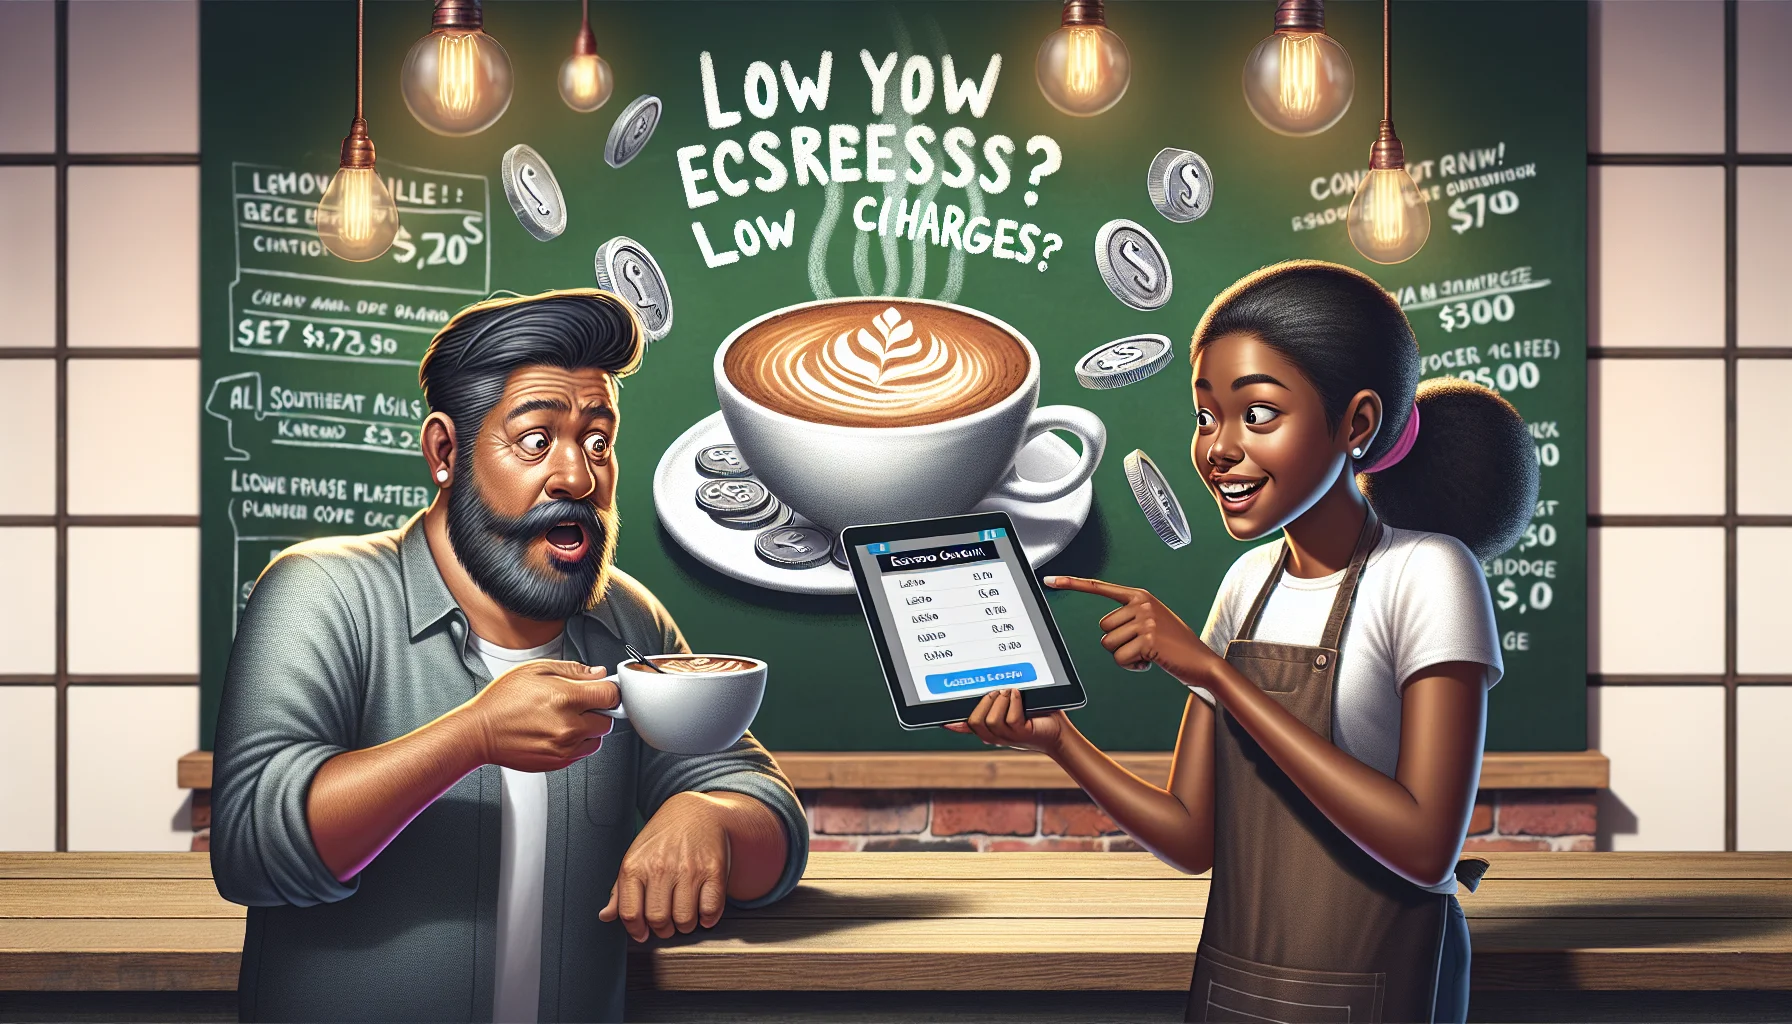 Create a whimsical and realistic image, featuring two characters humorously discussing the advantages of low charges for opening an espresso demat account. The first character is a Southeast Asian middle-aged man, dressed in casual clothing, drinking his espresso and looking surprised at the low-cost charges. The second character is a Black young adult woman barista, holding an iPad displaying the affordable charges, with a confident and persuasive smile on her face. The coffee shop setting is lively and vibrant with illustrations on the chalkboard behind them depicting a giant espresso cup and a small pile of coins symbolizing low charges.